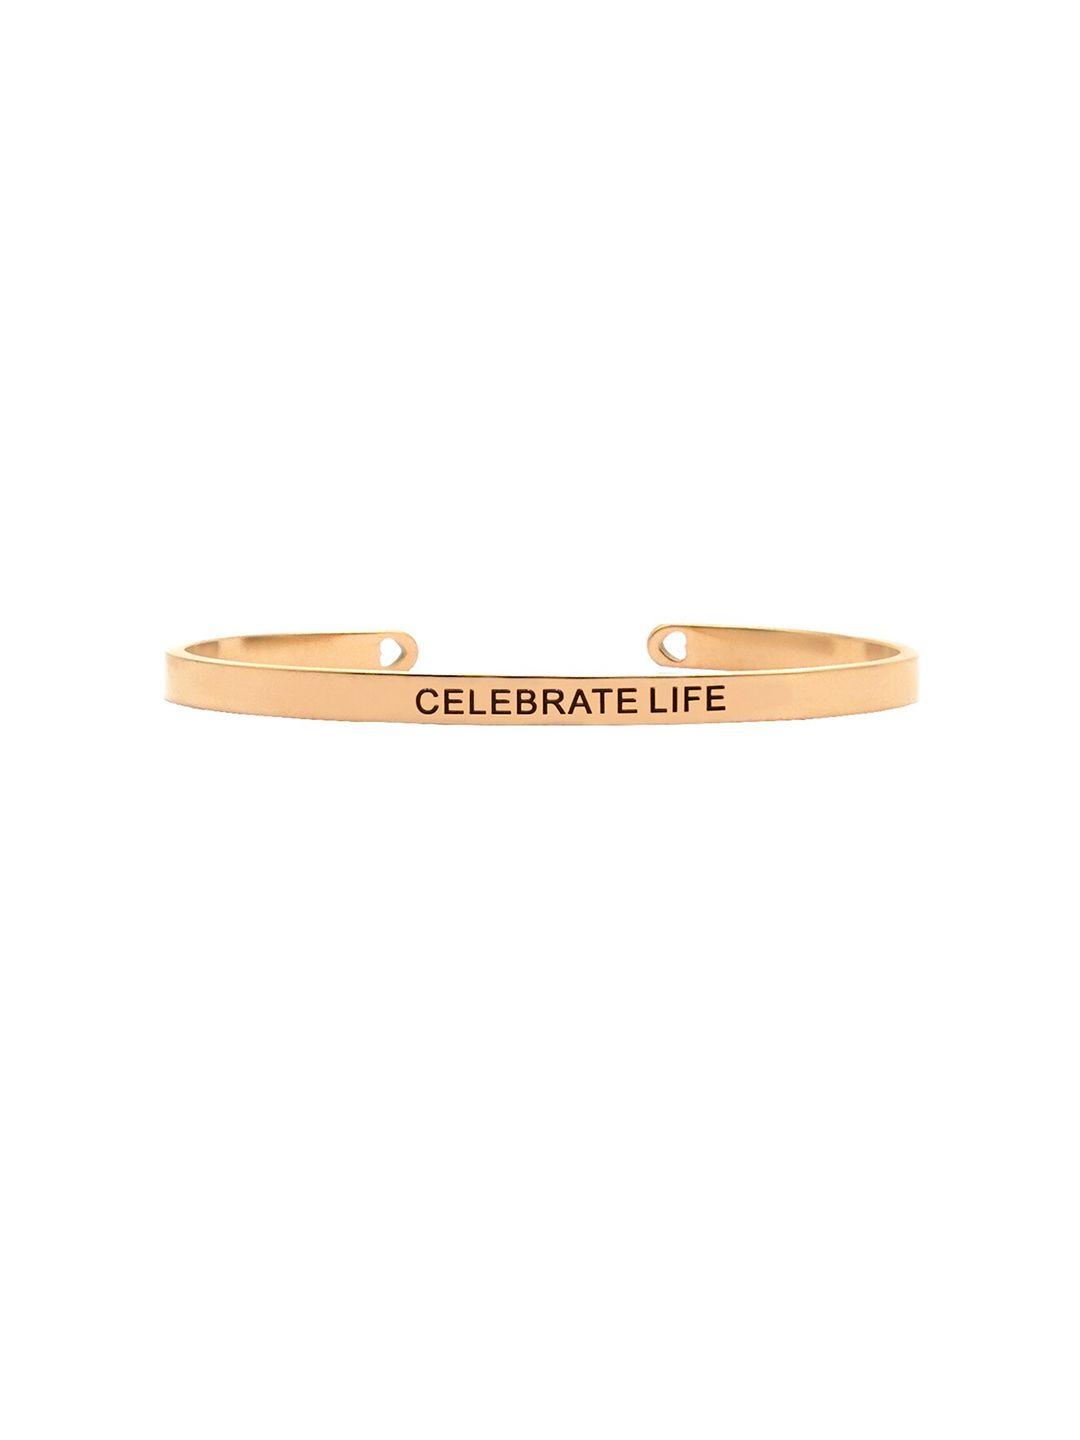 joker & witch rose gold-plated stainless steel celebrate life mantra band